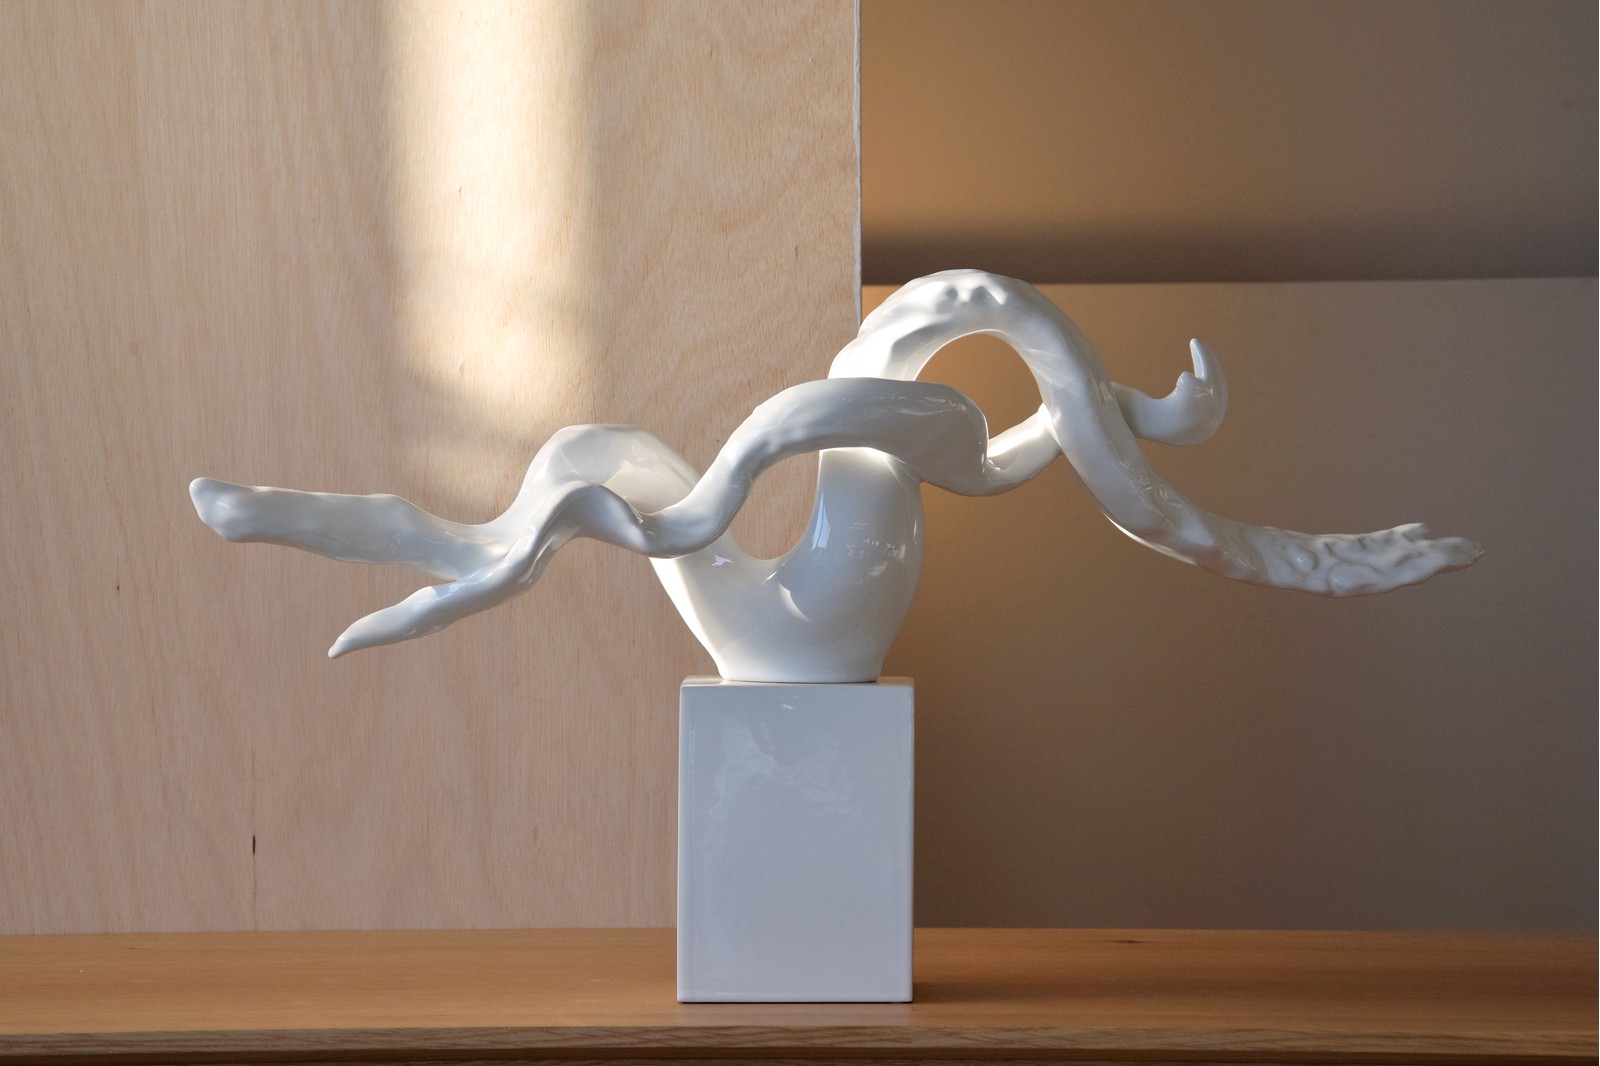 ABSTRACT CERAMIC SCULPTURE